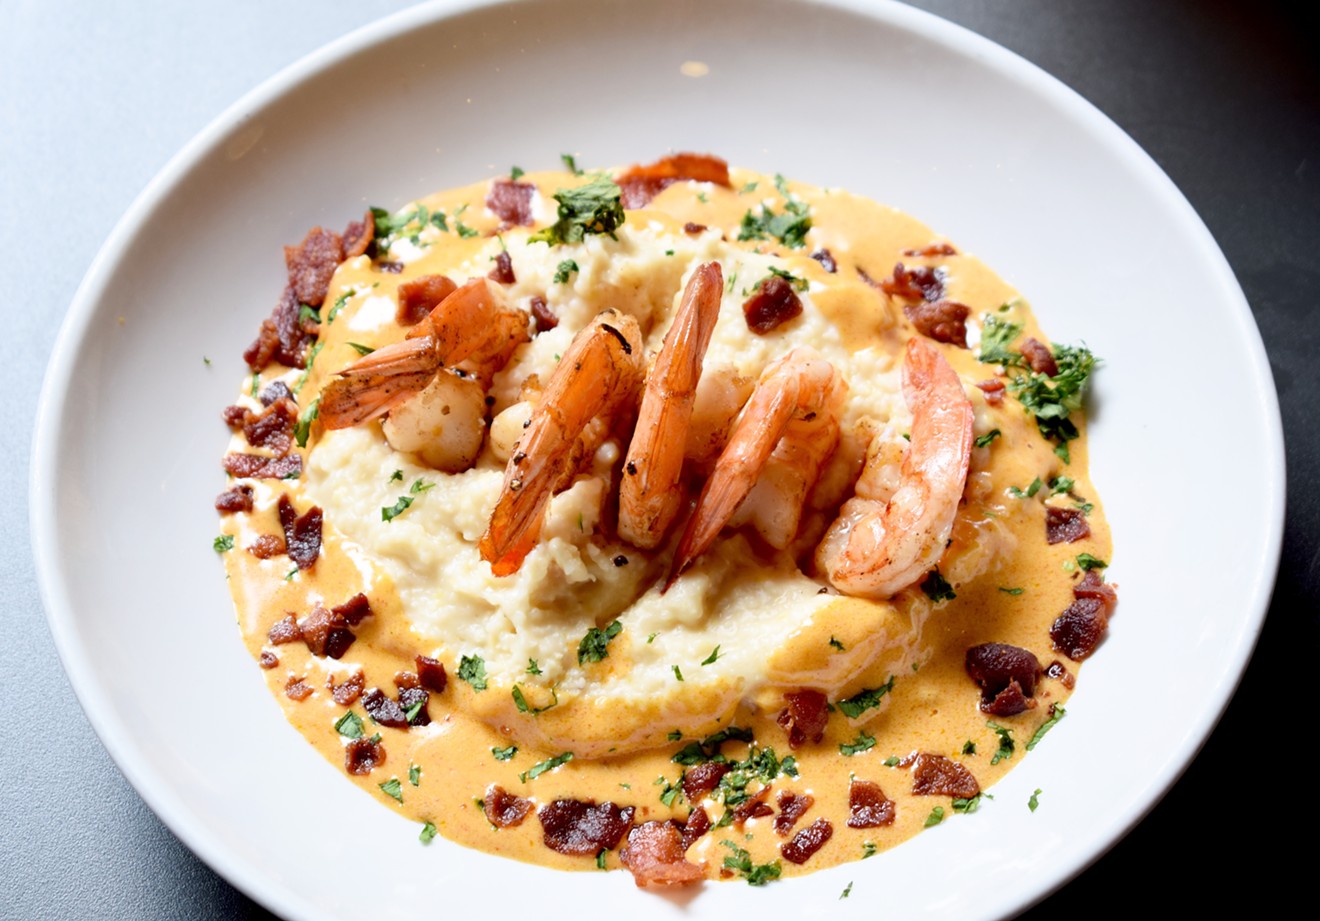 Dish Society's menu is stacked with Lent-friendly options, like this Shrimp & Grits.